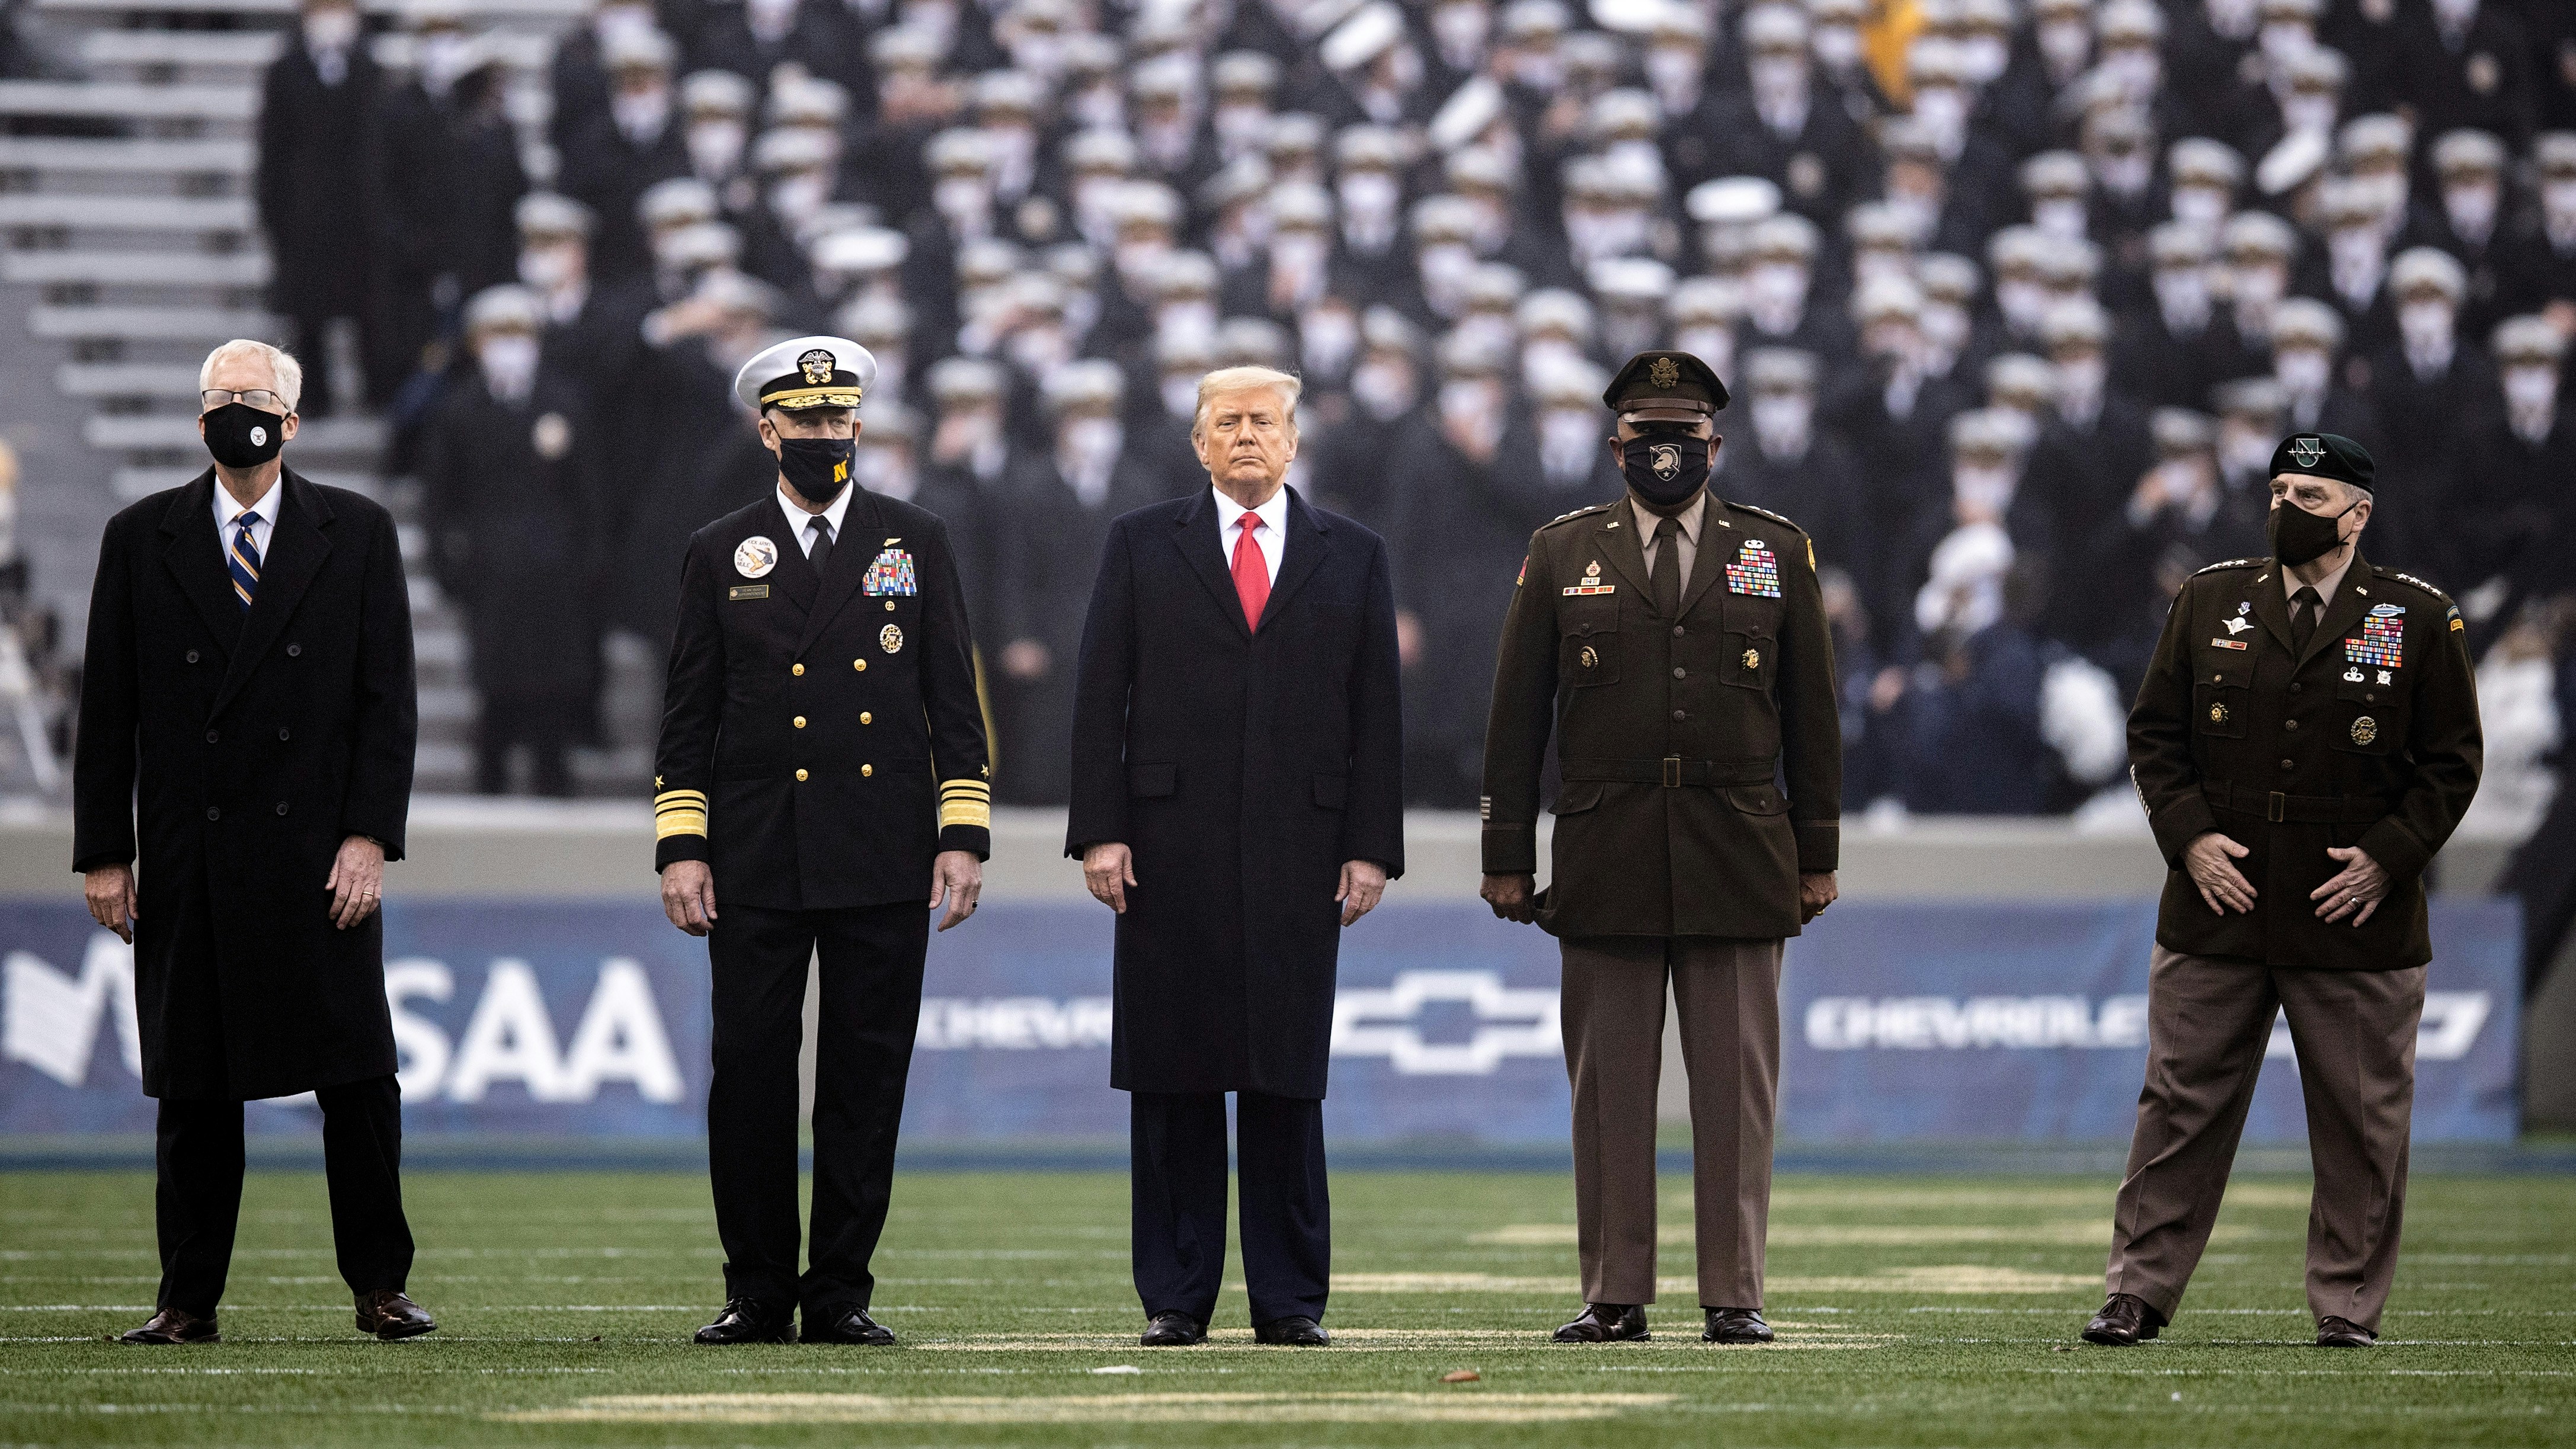 WEST POINT, NY - DECEMBER 12: Acting Secretary of Defense, Christopher C. Miller, United States Naval Academy Superintendent Vice Admiral Sean Buck, President Donald Trump, Superintendent of the United States Military Academy Lieutenant General Darryl A. Williams, and Chairman of the Joint Chiefs Mark A. Milley before the start of a game between the Army Black Knights and the Navy Midshipmen at Michie Stadium on December 12, 2020 in West Point, New York. (Photo by Dustin Satloff/Getty Images)